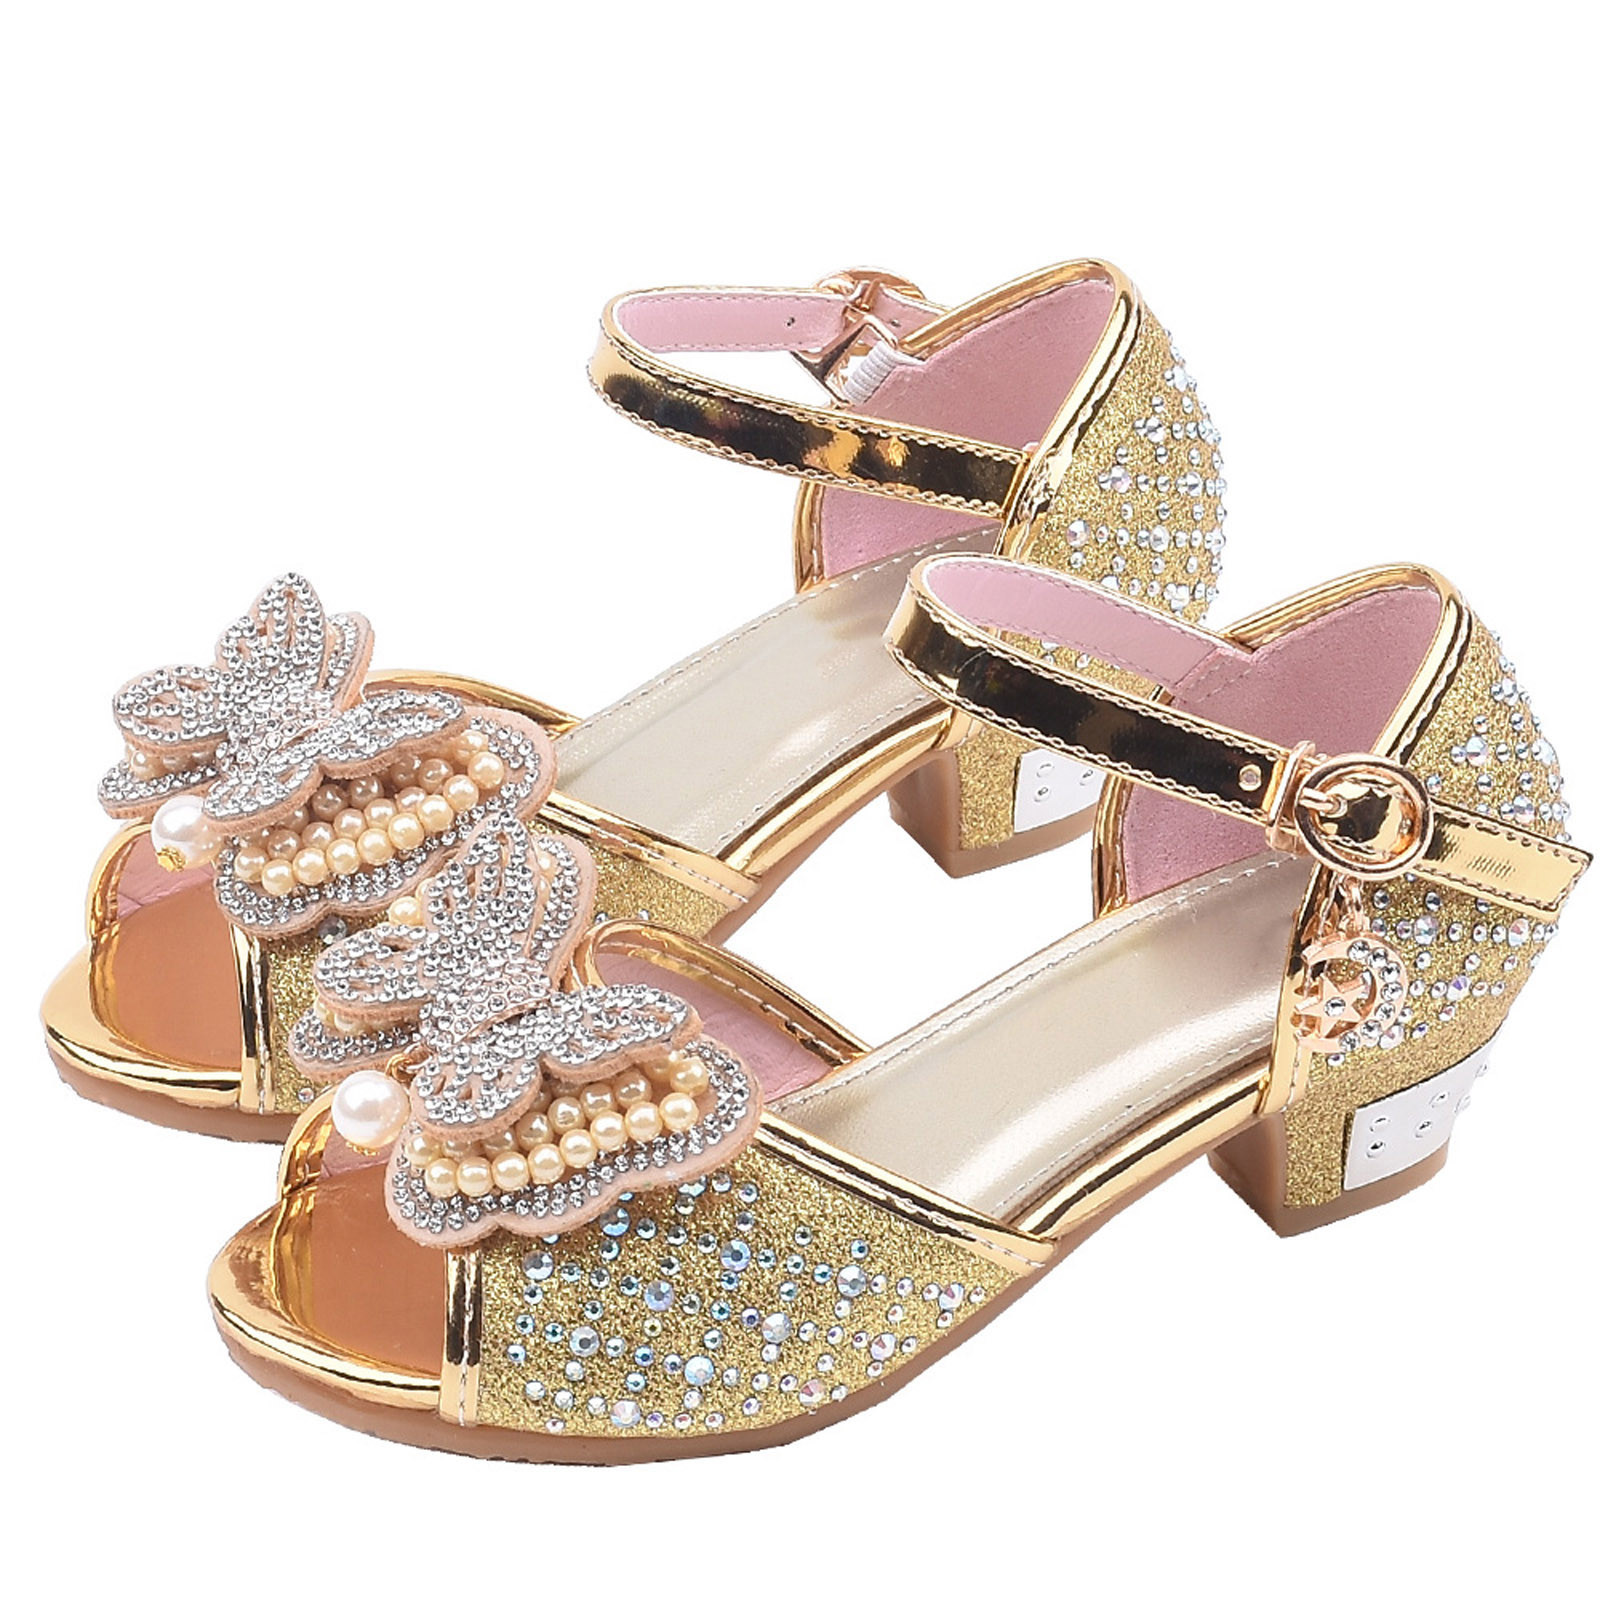 Penkiiy Children's Shoes Girls Fish Mouth Butterfly Pearl Rhinestone Crystal Princess Shoes Dance Shoes Cool Sandals for Kids 5-5.5 Years Gold 2023 Summer Deal - image 4 of 7